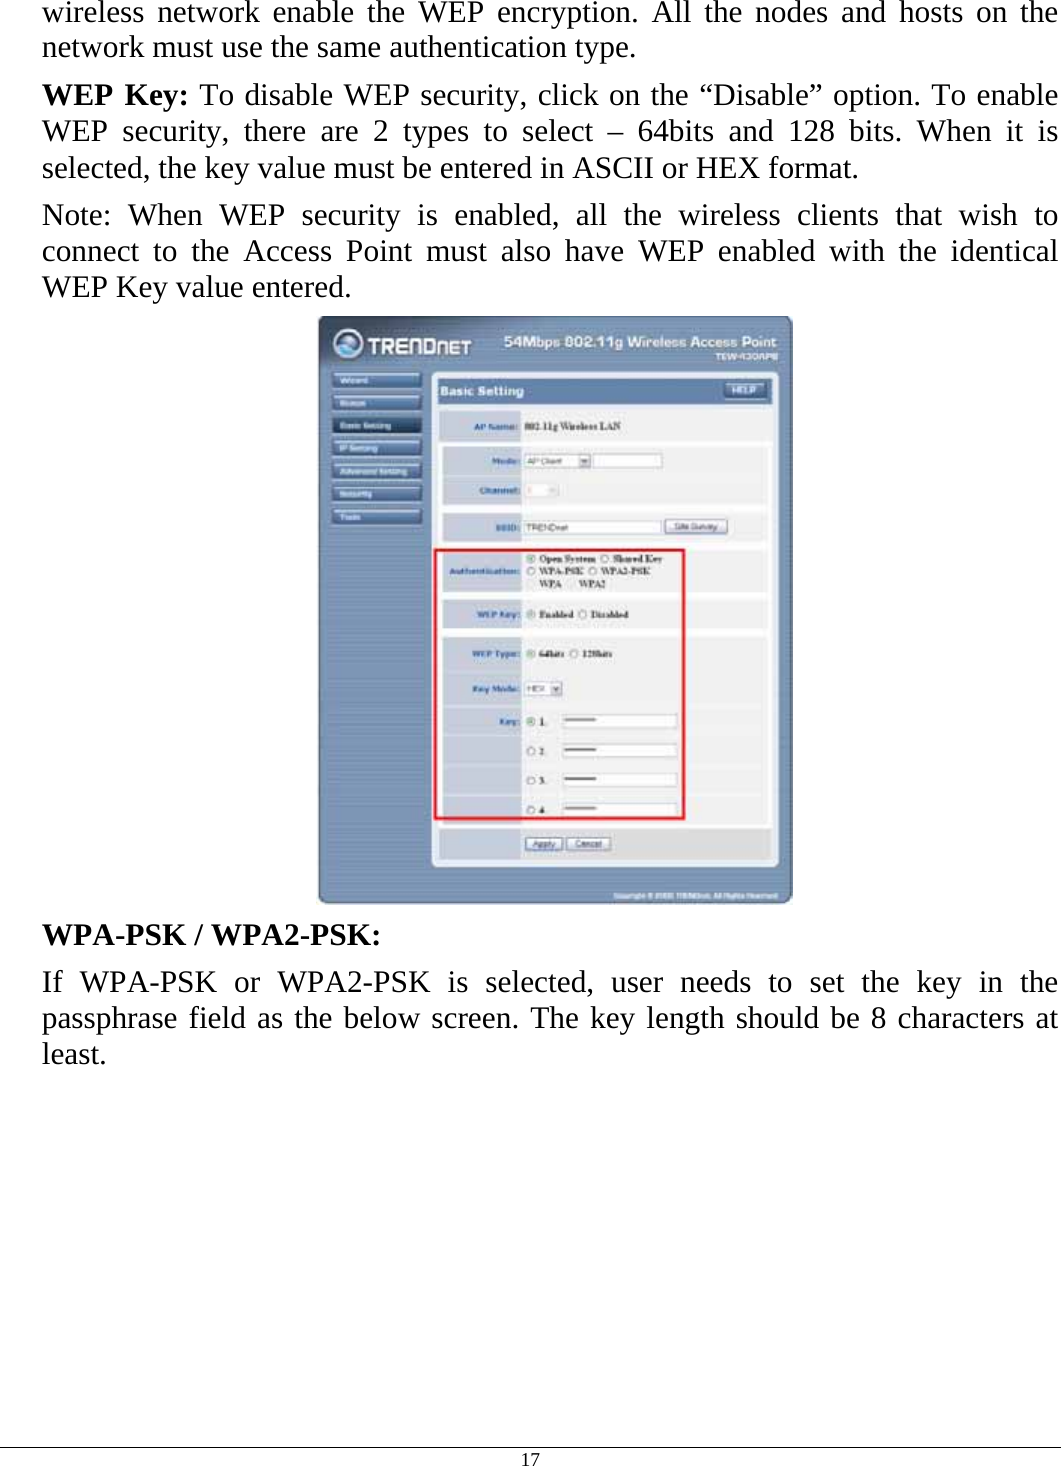  17 wireless network enable the WEP encryption. All the nodes and hosts on the network must use the same authentication type.   WEP Key: To disable WEP security, click on the “Disable” option. To enable WEP security, there are 2 types to select – 64bits and 128 bits. When it is selected, the key value must be entered in ASCII or HEX format. Note: When WEP security is enabled, all the wireless clients that wish to connect to the Access Point must also have WEP enabled with the identical WEP Key value entered.   WPA-PSK / WPA2-PSK:    If WPA-PSK or WPA2-PSK is selected, user needs to set the key in the passphrase field as the below screen. The key length should be 8 characters at least. 